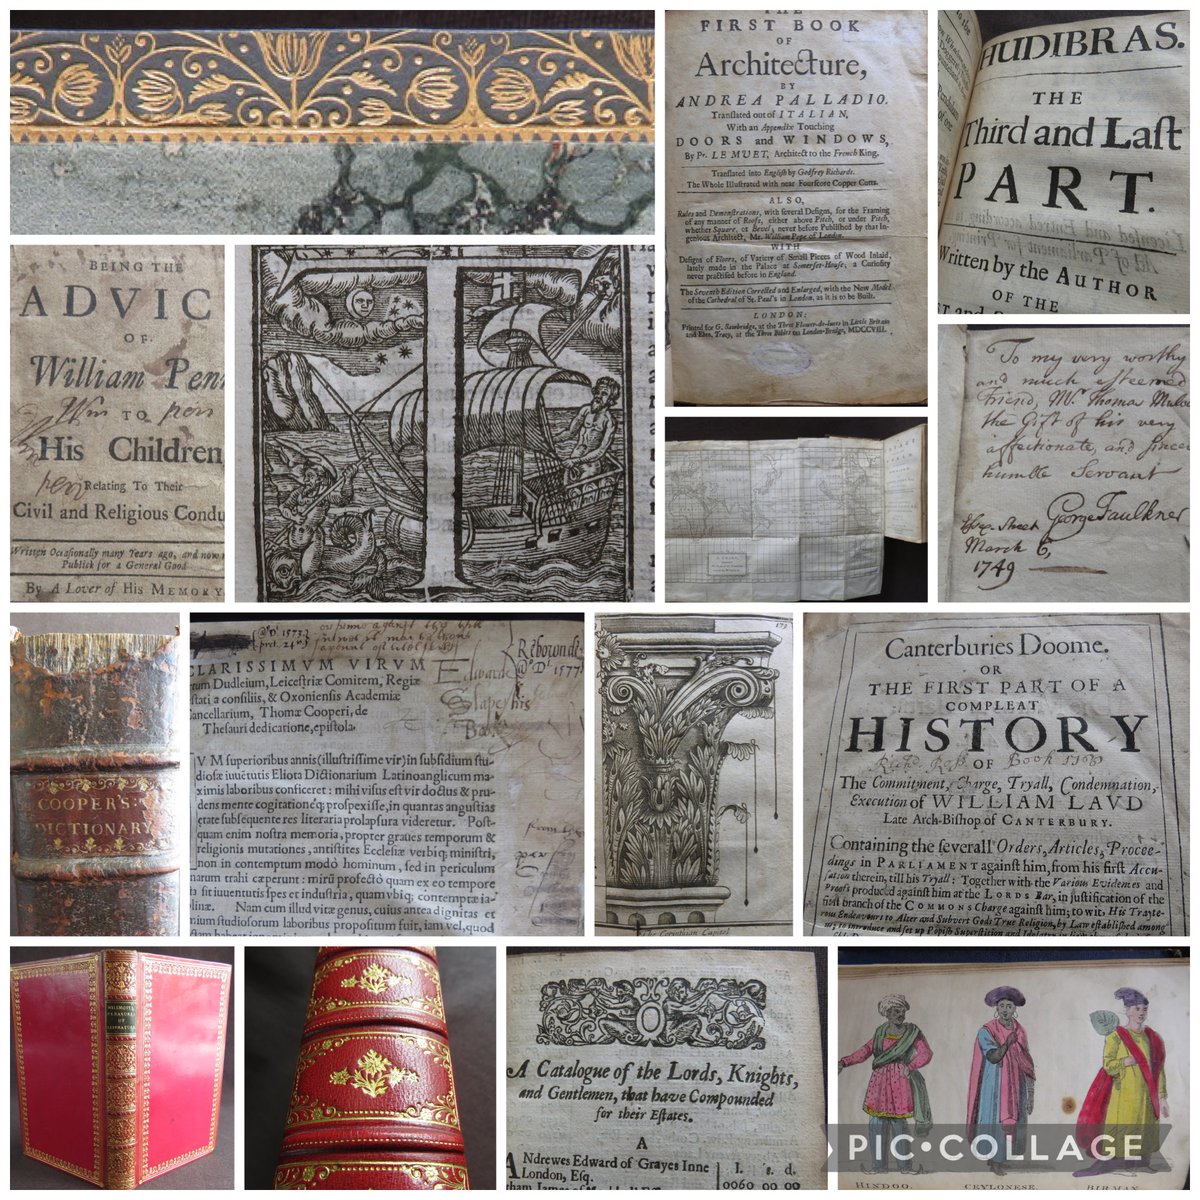 IT'S AUCTION DAY! 
Rare and Antiquarian books auctions, ending from 8pm (UK time)  

#antiquarian #rarebooks #bibliophile #history #BookTwitter #bookhistory #earlymodern #philosophy #religion #bookauction
ebay.co.uk/str/wisdompedl…